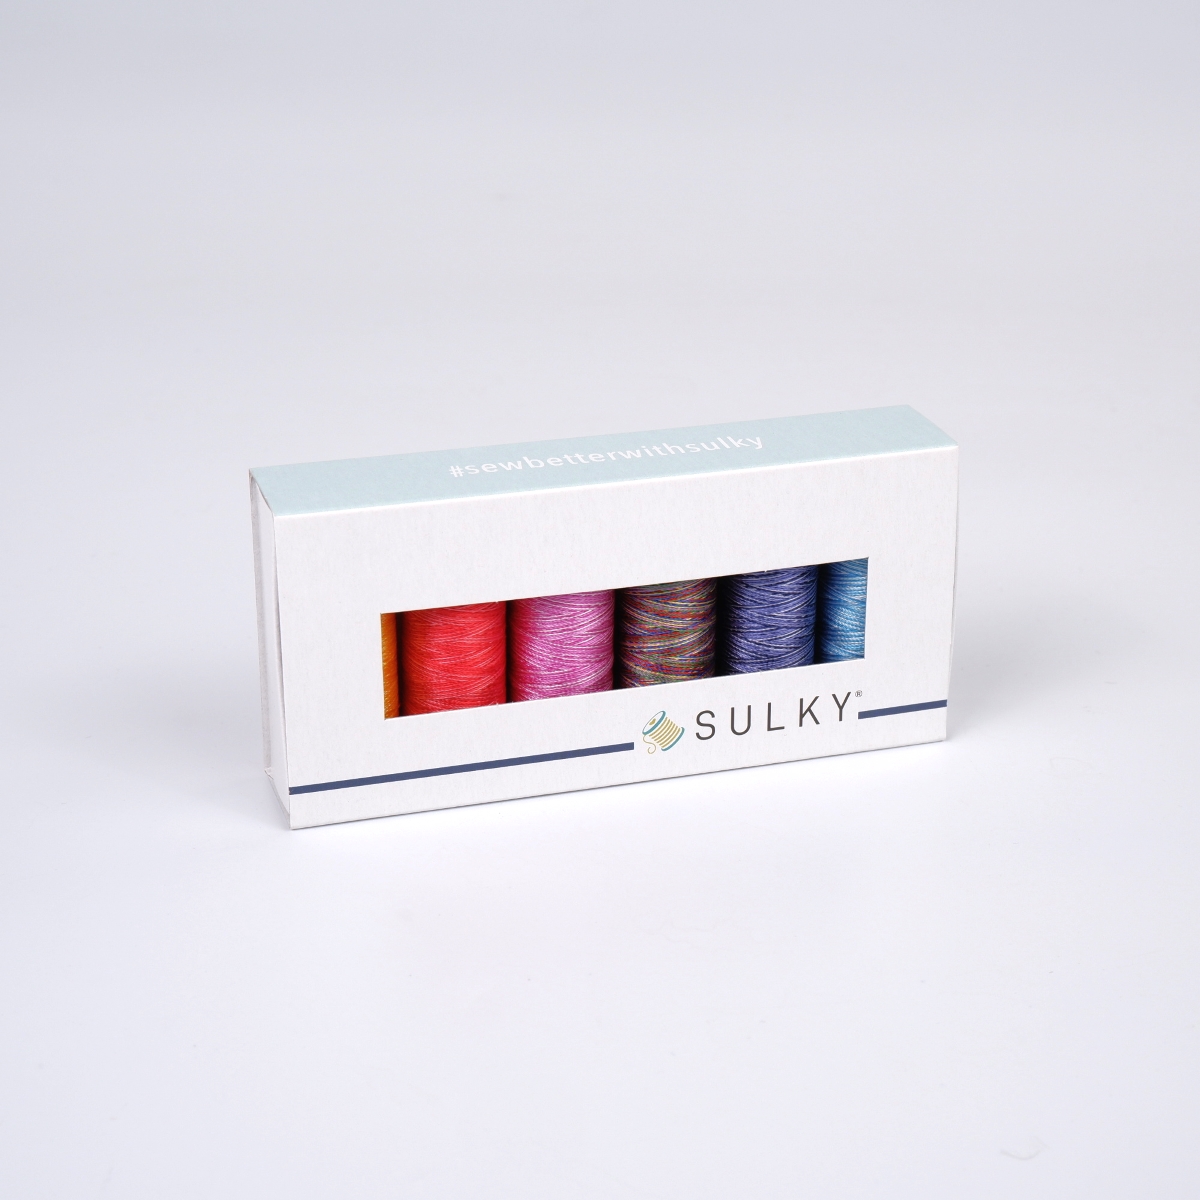 SULKY RAYON 40 - BESTSELLER MULTICOLOR
(6x 225m Snap Spools)